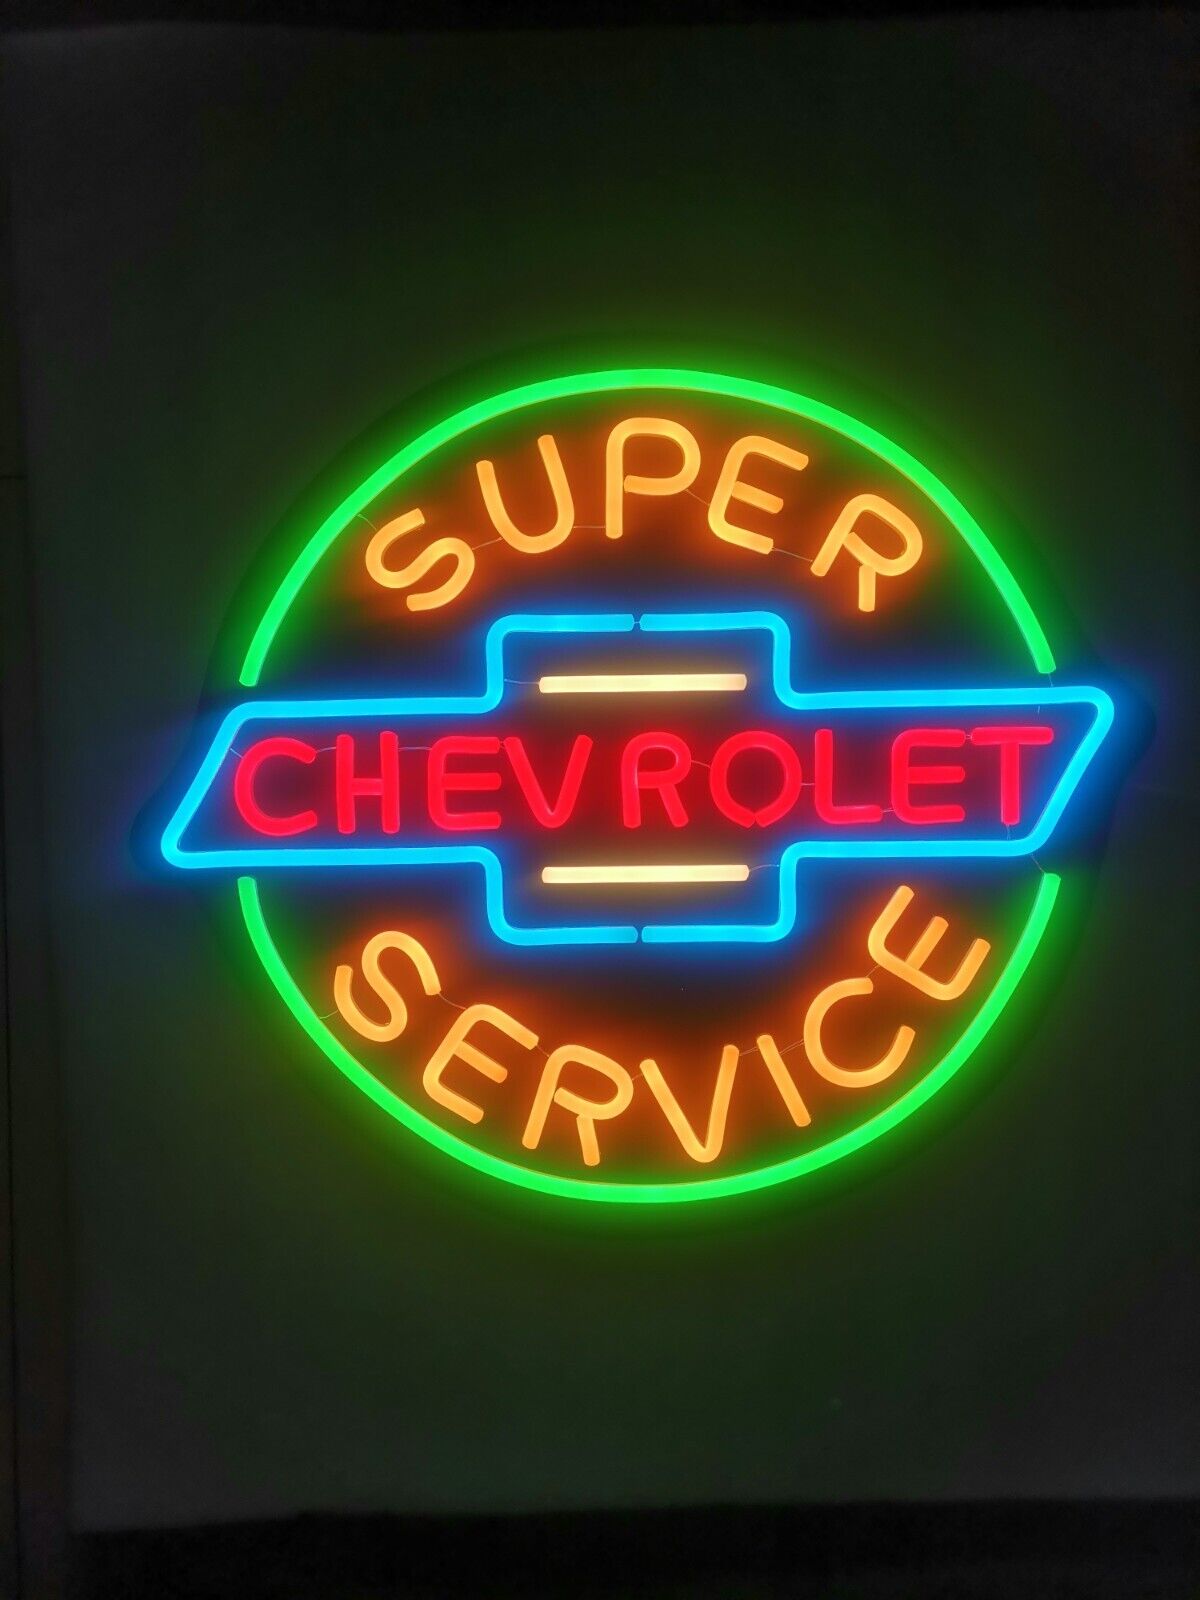 Supper Chevrolet Service Led  Neon Sign, size 24x24 in, , UL/CUL/CE listed